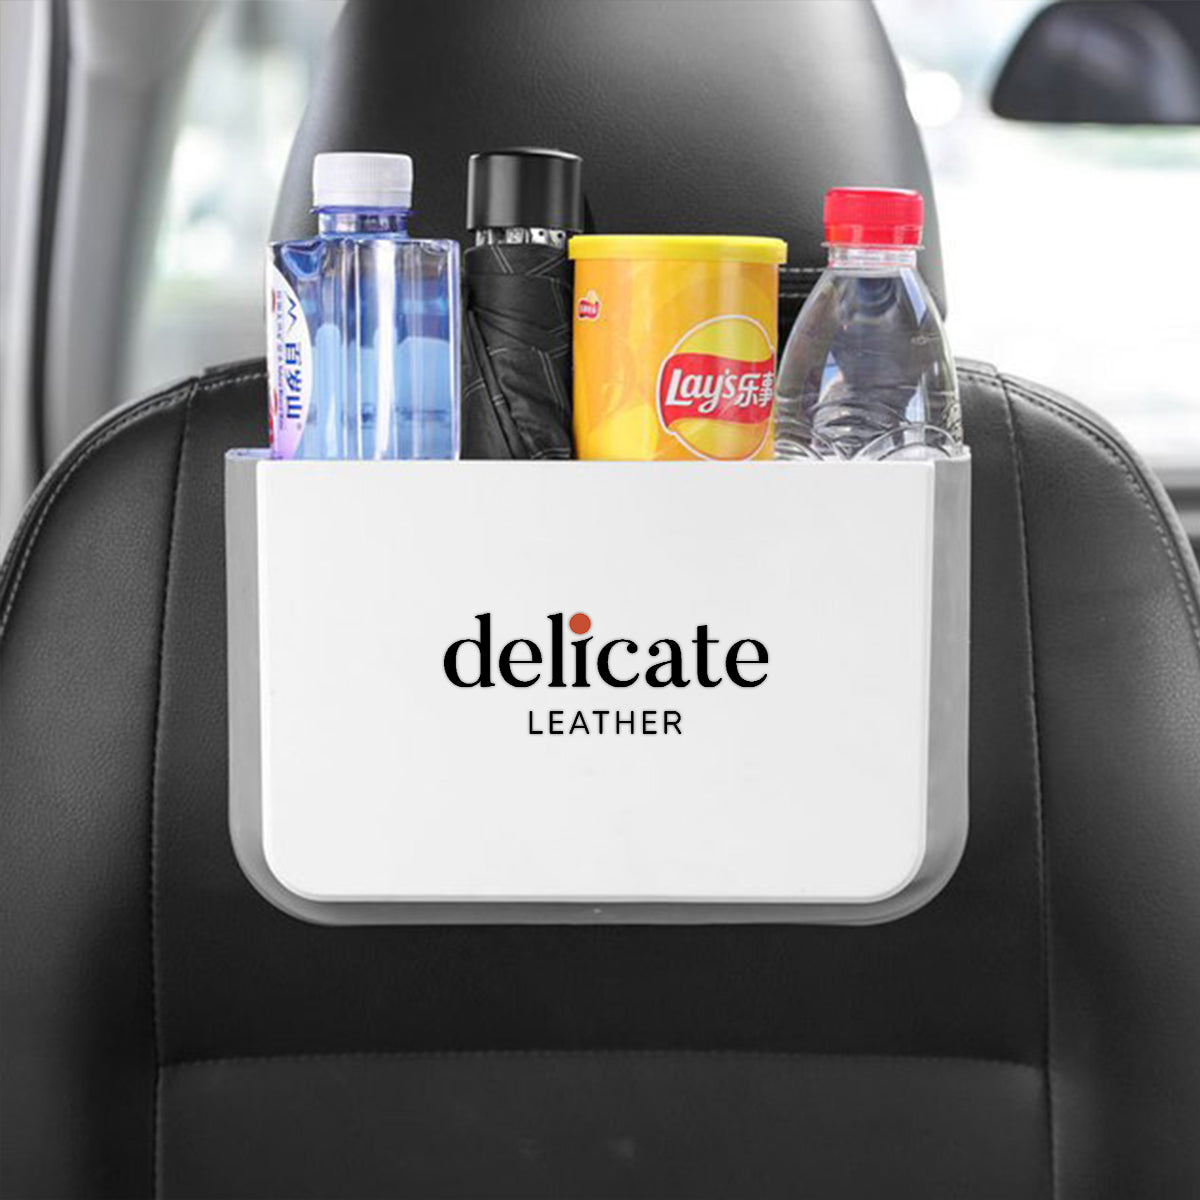 Hanging Waterproof Car Trash can-Foldable, Custom For Your Cars, Waterproof, and Equipped with Cup Holders and Trays. Multi-Purpose, Car Accessories HA11992 - Delicate Leather